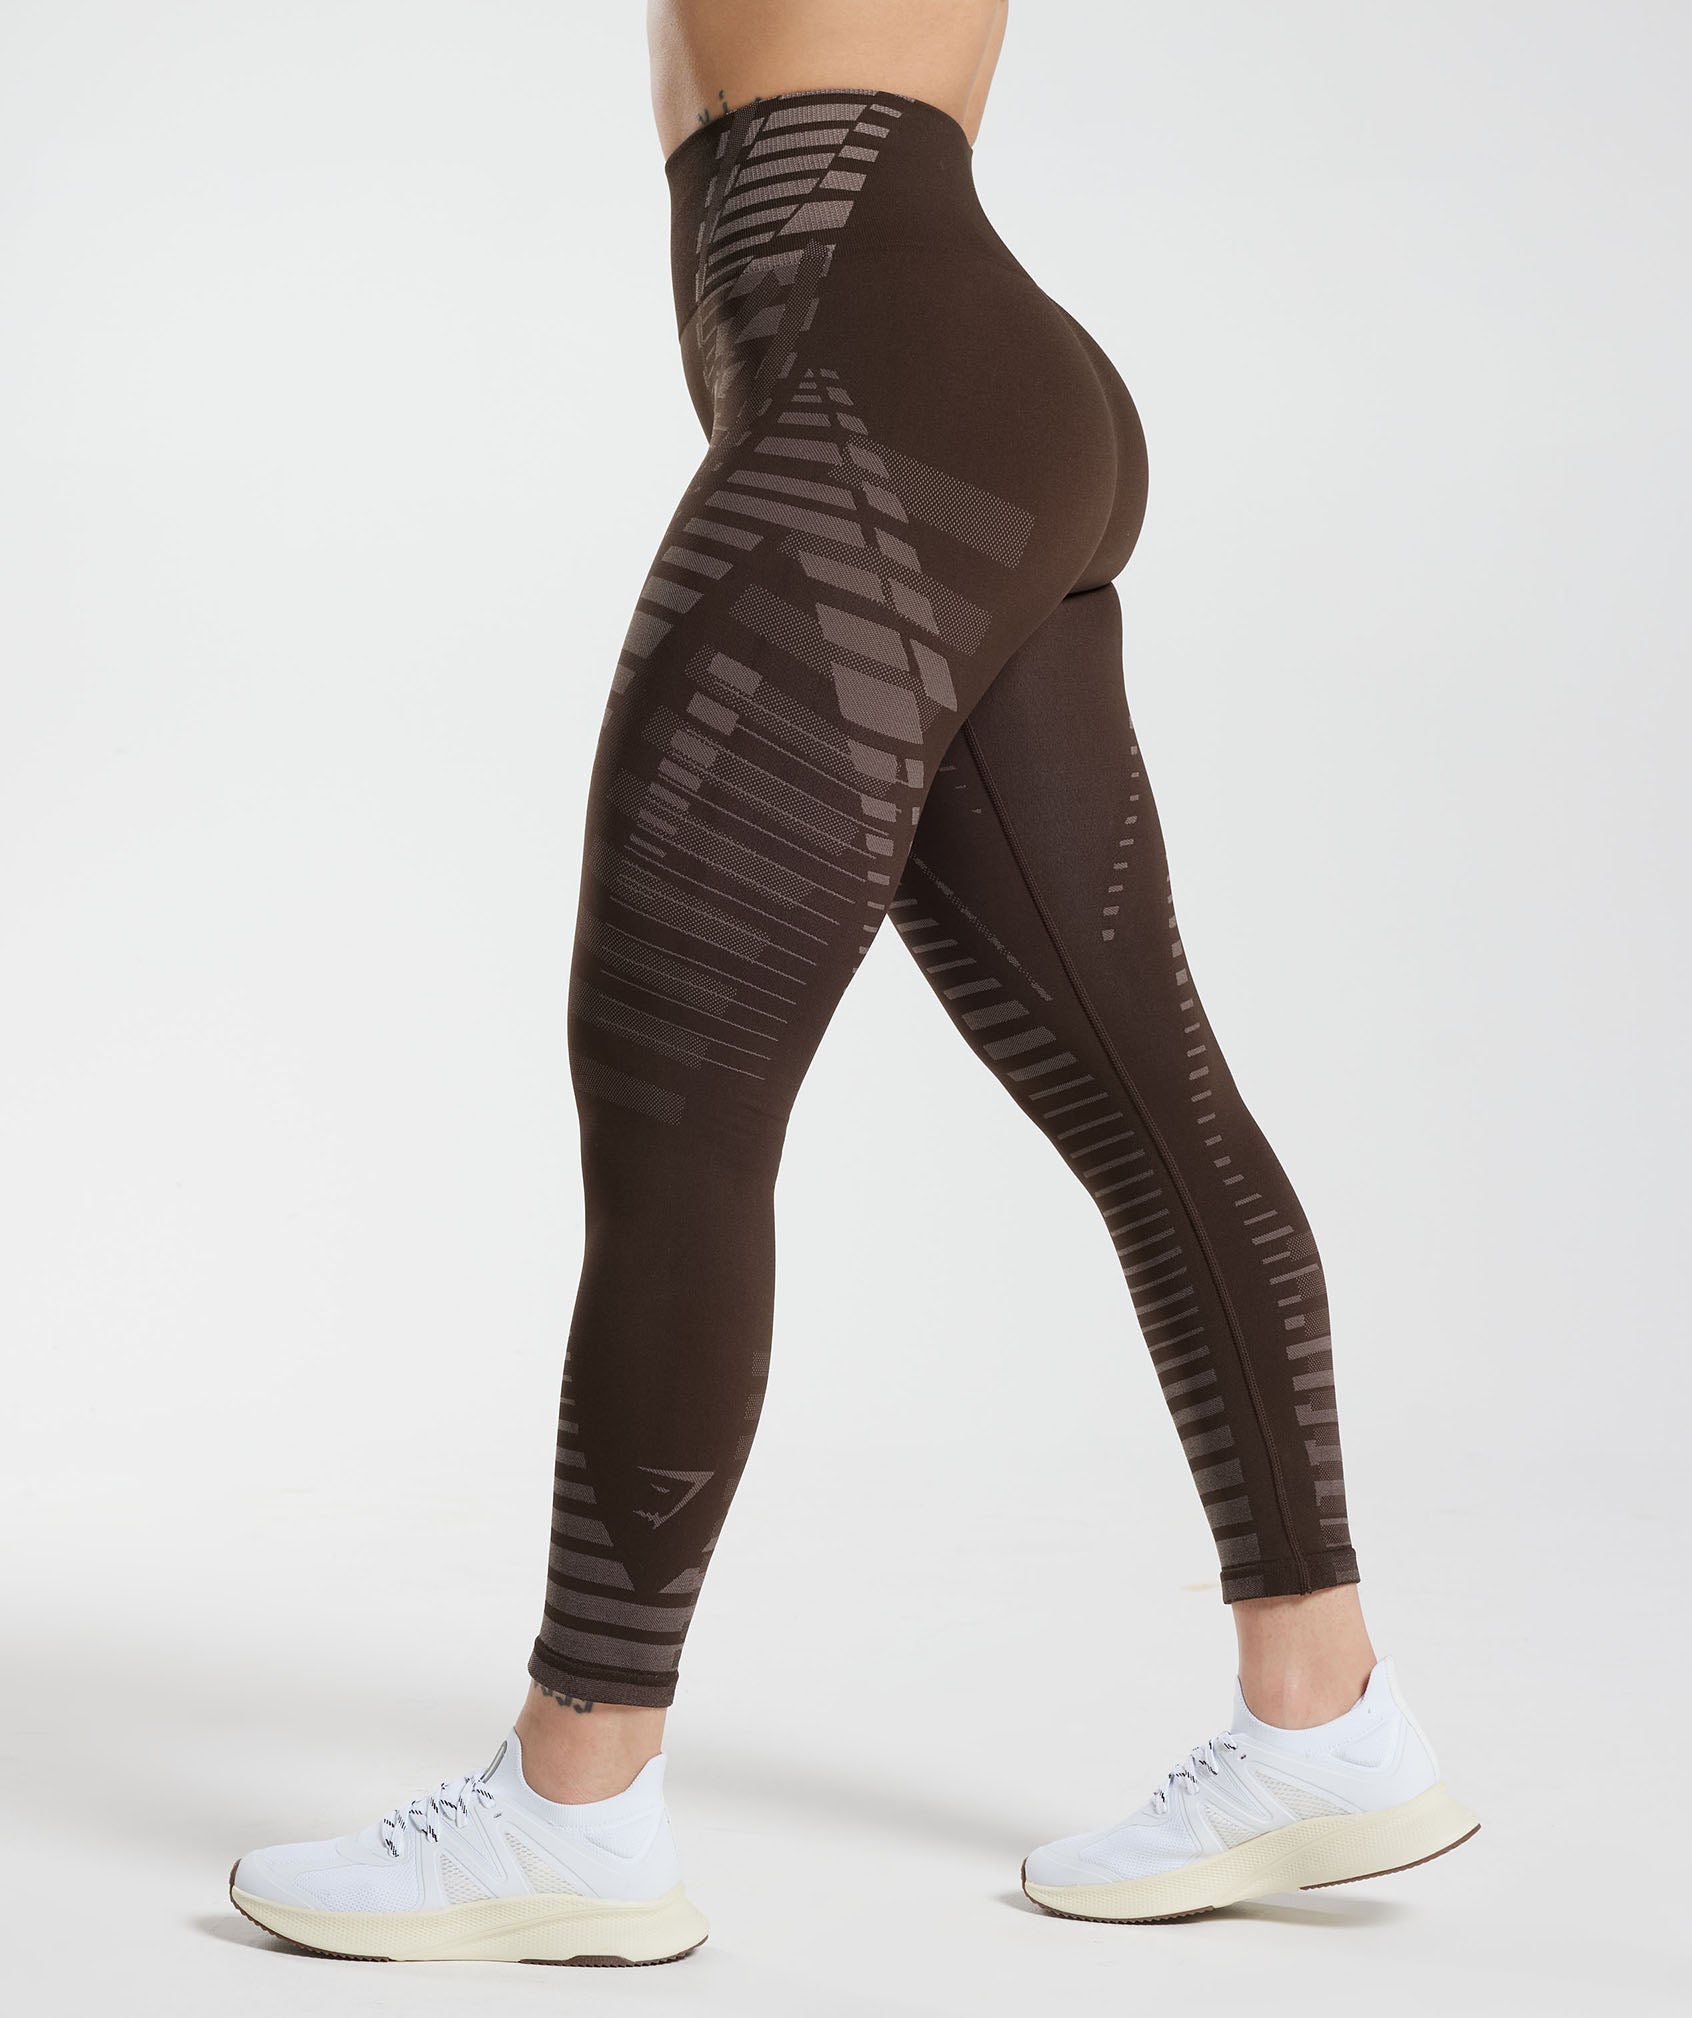 Apex Limit Leggings in Archive Brown/Truffle Brown - view 3